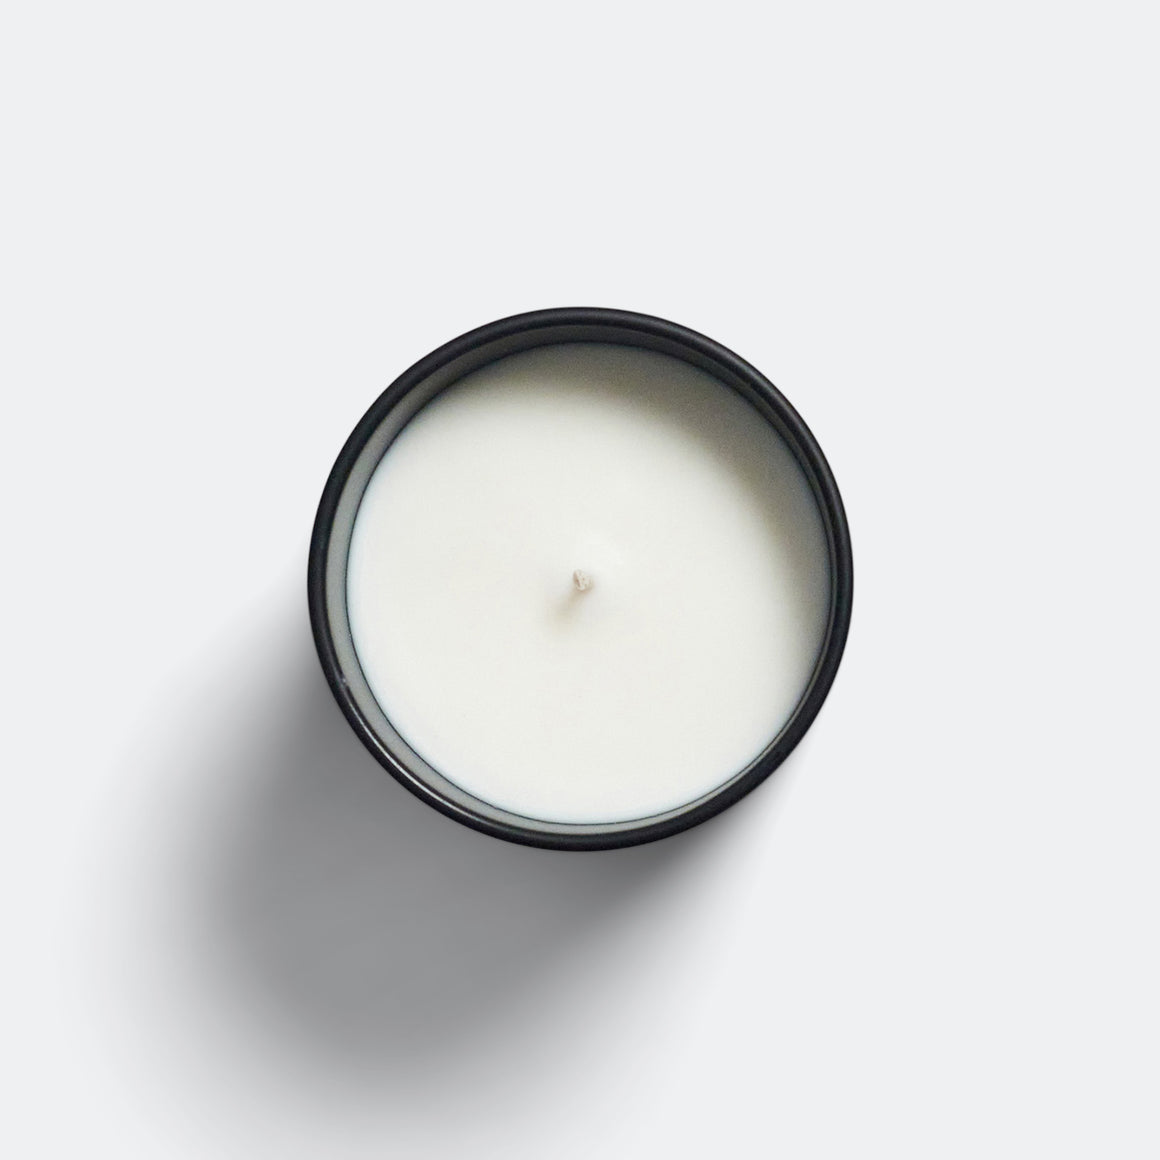 Mihan Aromatics - Guilty Story Candle - 300g - UP THERE